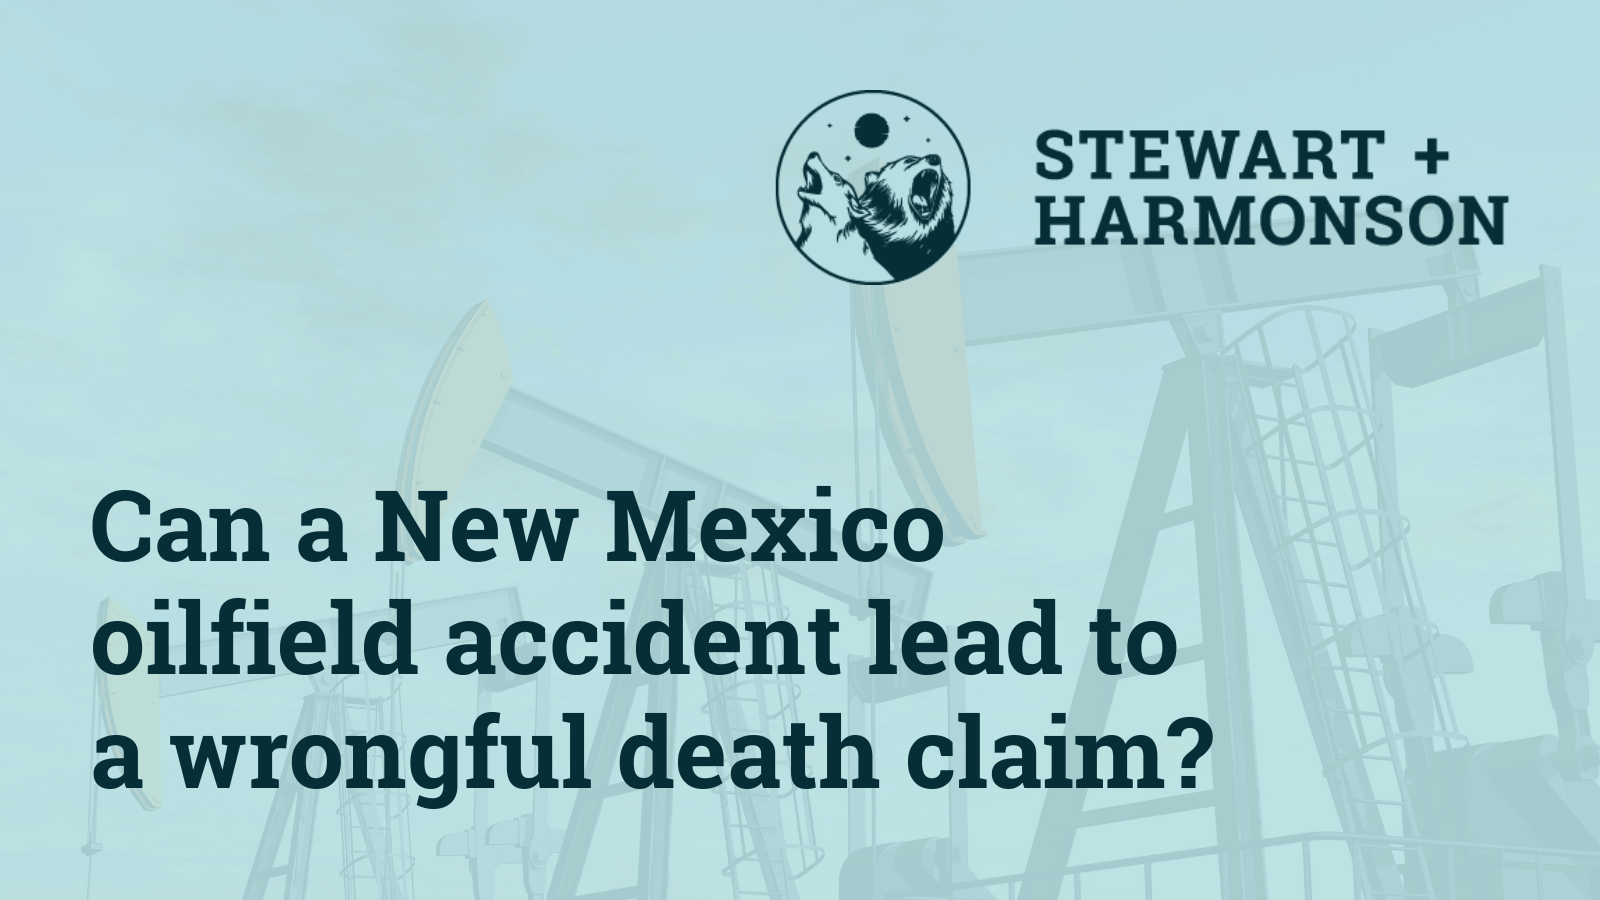 Can a New Mexico oilfield accident lead to a wrongful death claim - Stewart Harmonson Law Firm - New Mexico